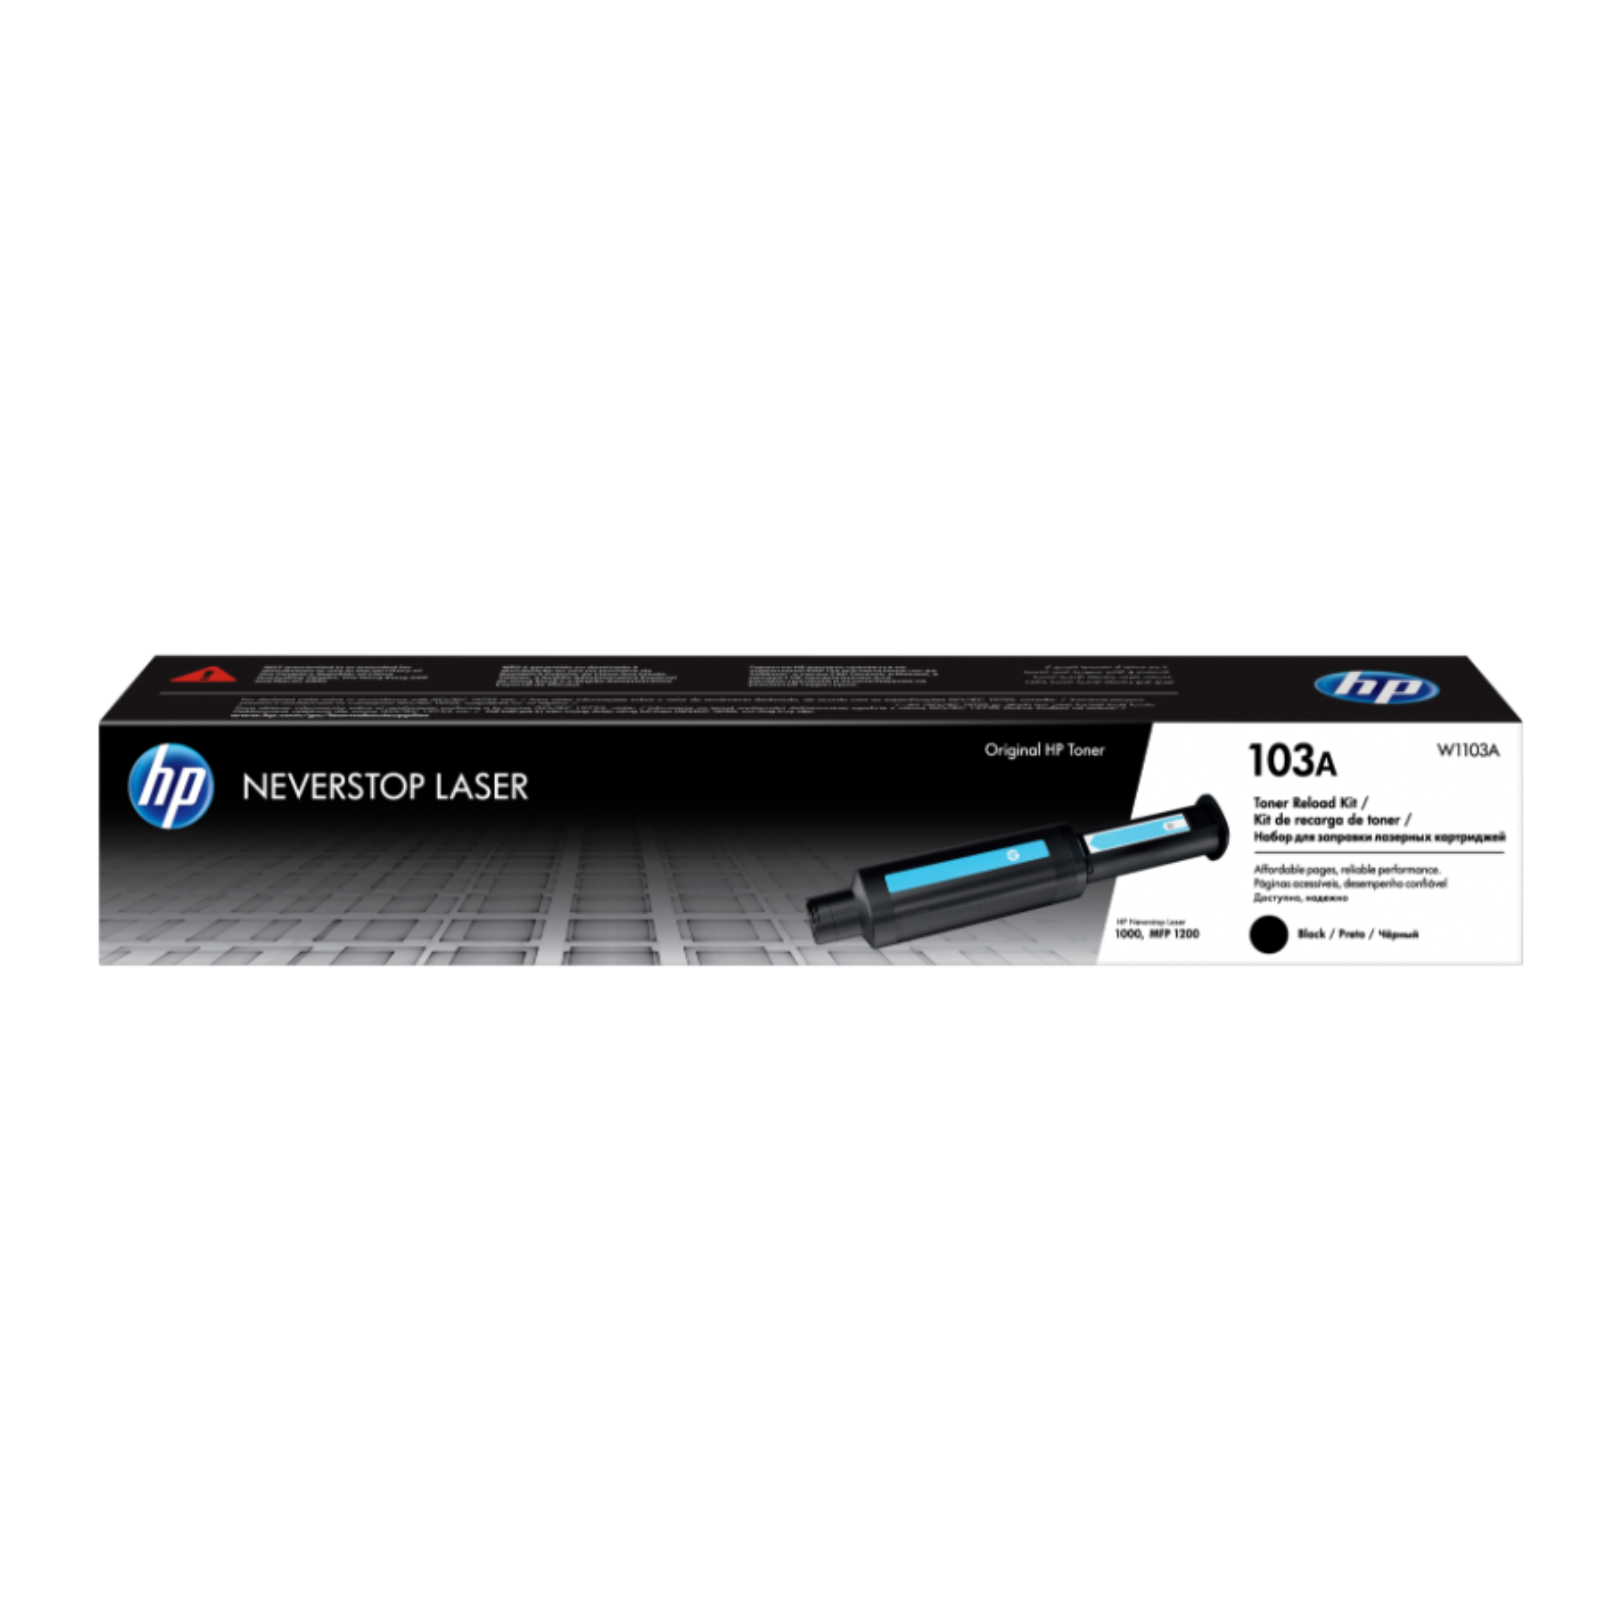 Toner HP 103A Negro (W1103A) Laser Neverstop 1000/1200 2500 Pag.